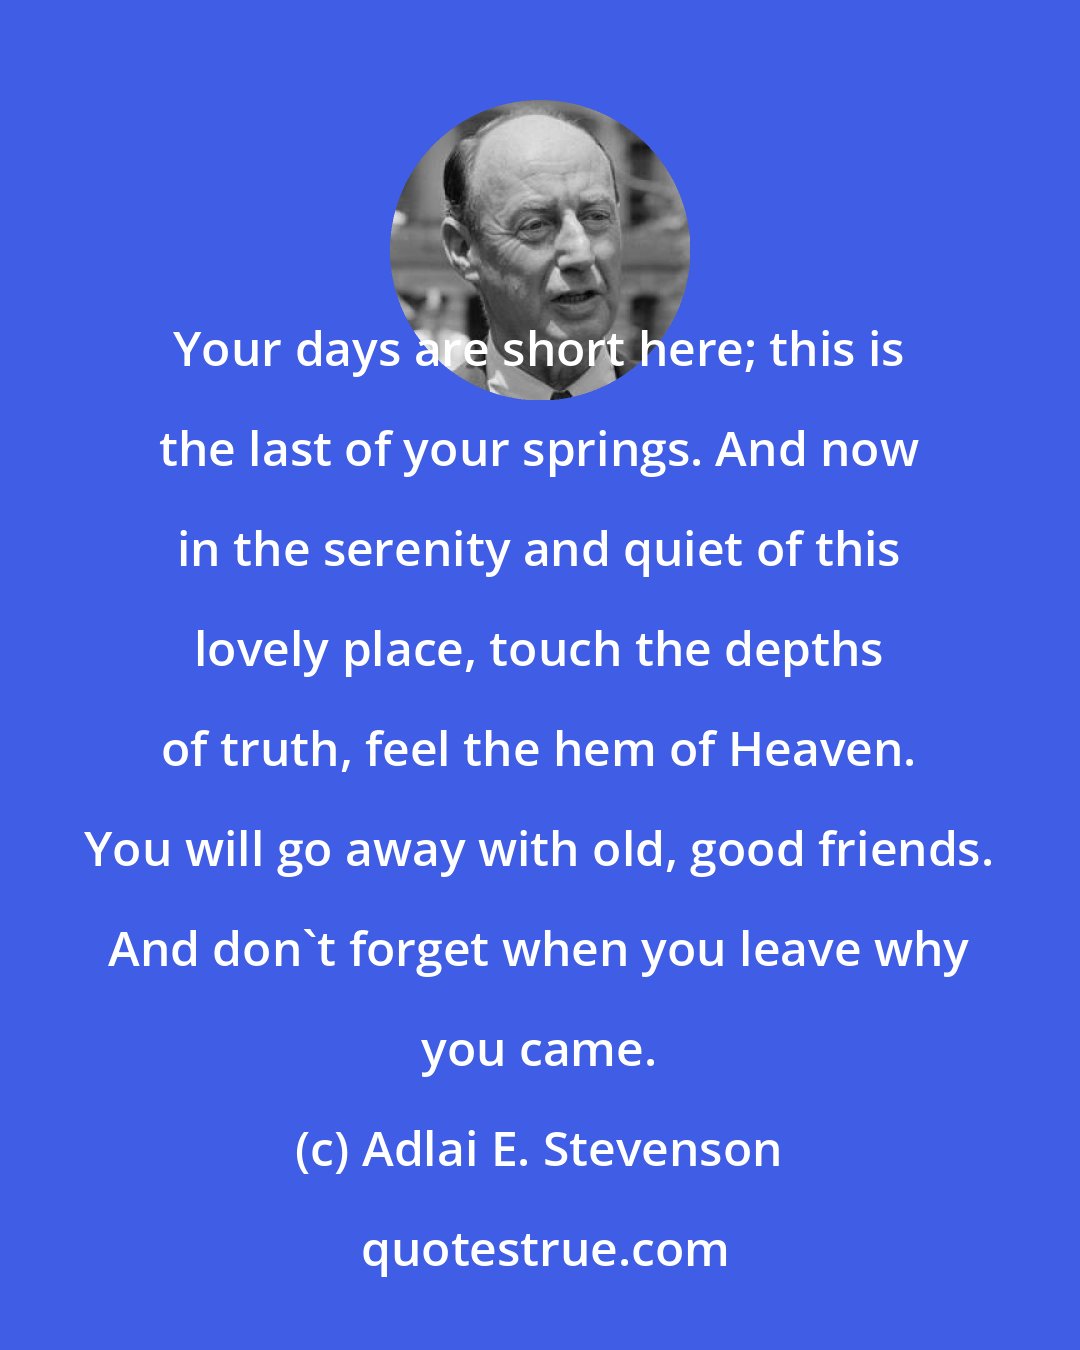 Adlai E. Stevenson: Your days are short here; this is the last of your springs. And now in the serenity and quiet of this lovely place, touch the depths of truth, feel the hem of Heaven. You will go away with old, good friends. And don't forget when you leave why you came.